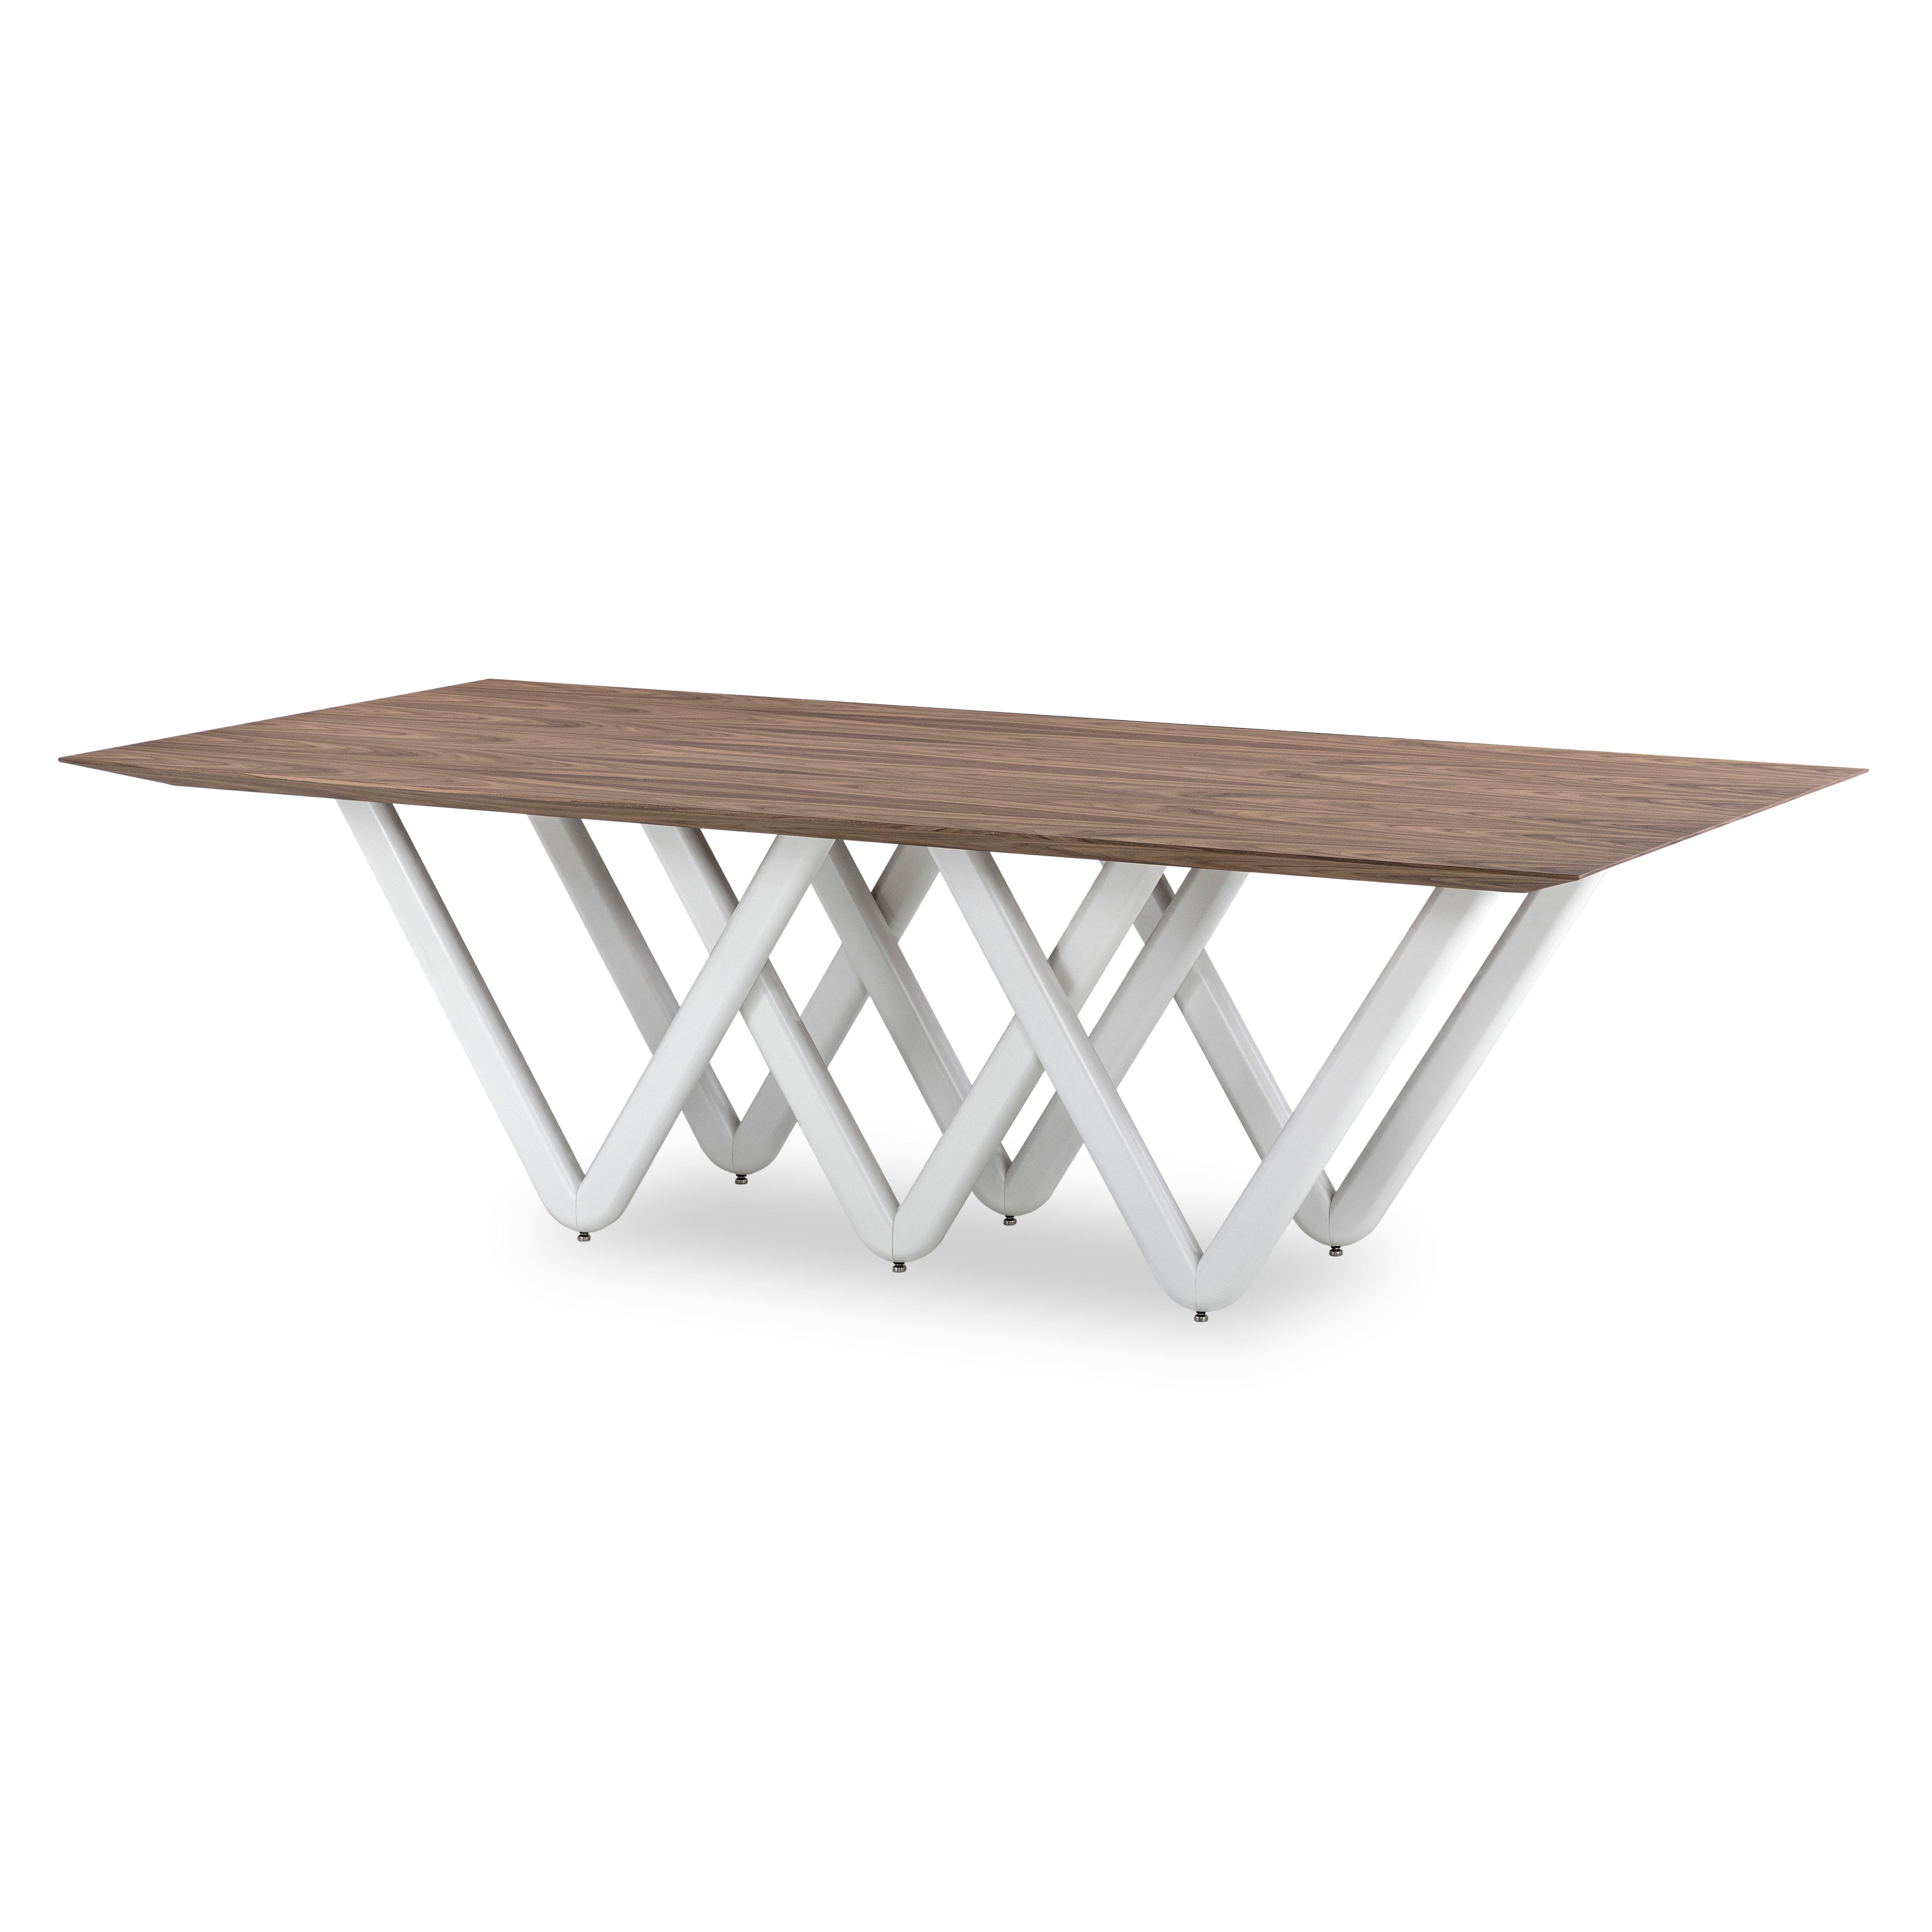 The Dablio dining table features a white-painted intersecting V-shaped base that is highlighted by a stunning Walnut veneered tabletop. It has a very singular and original structure and at the same time, it is a very simple but modern dining table.